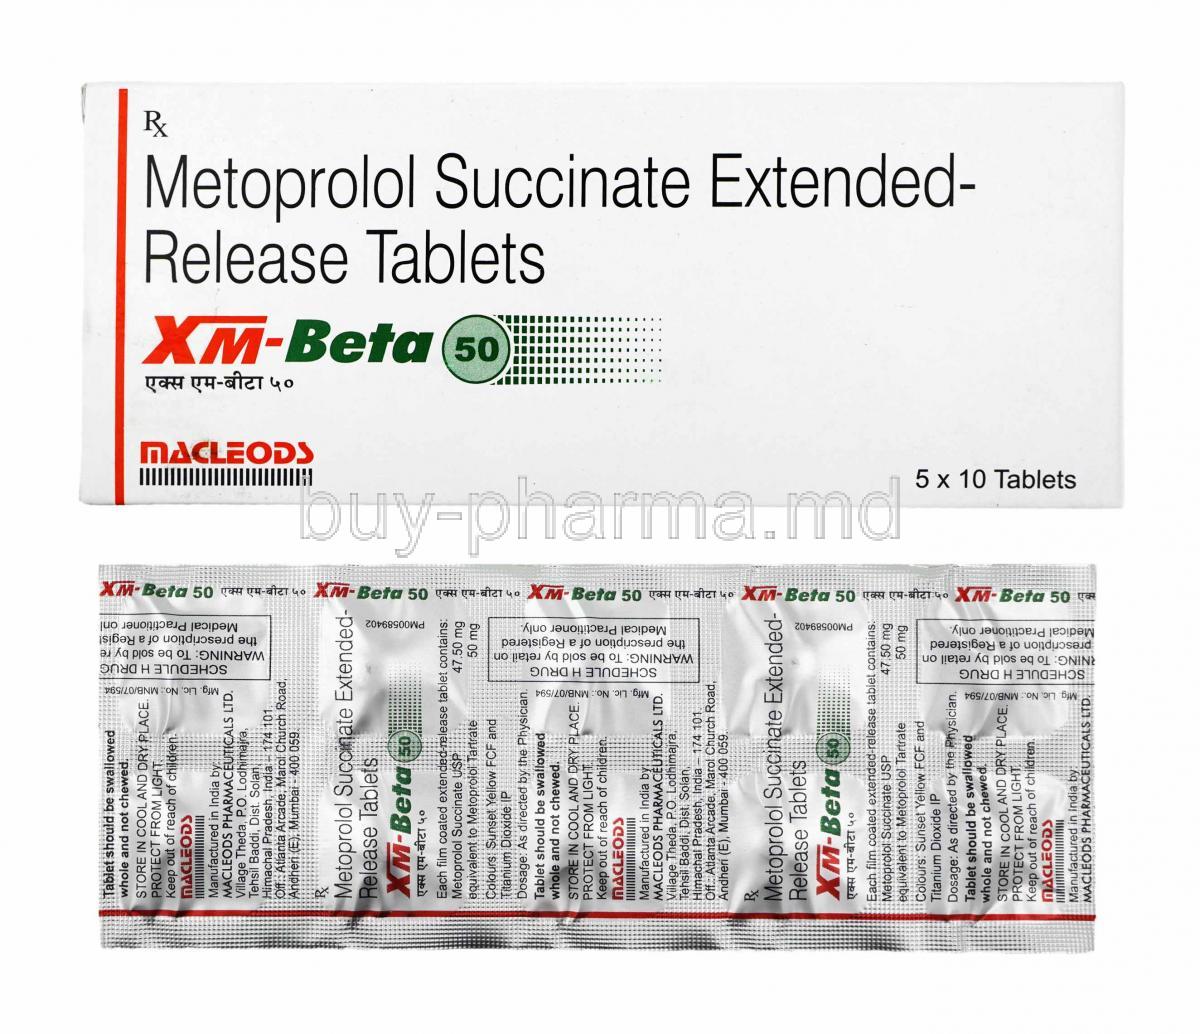 XM-Beta, Metoprolol Succinate 50mg box and tablets